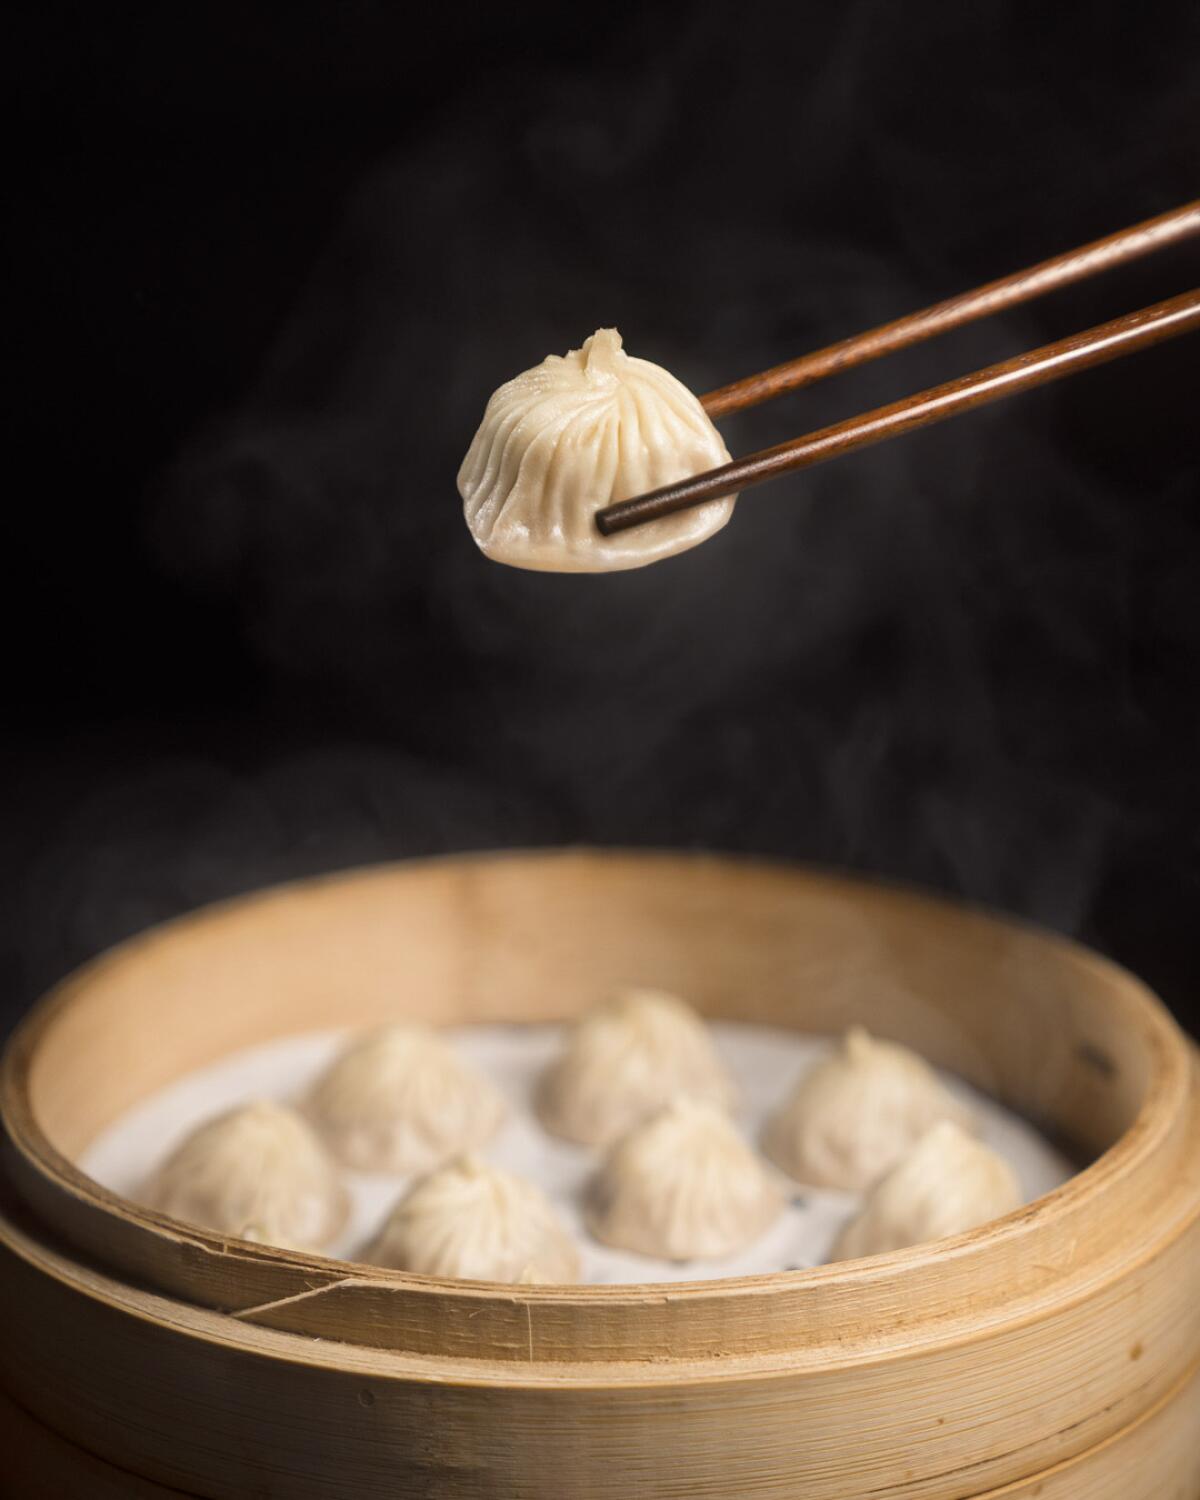 Xiao long bao at Chinese restaurant Din Tai Fung are broth-filled dumplings steamed in bamboo baskets.